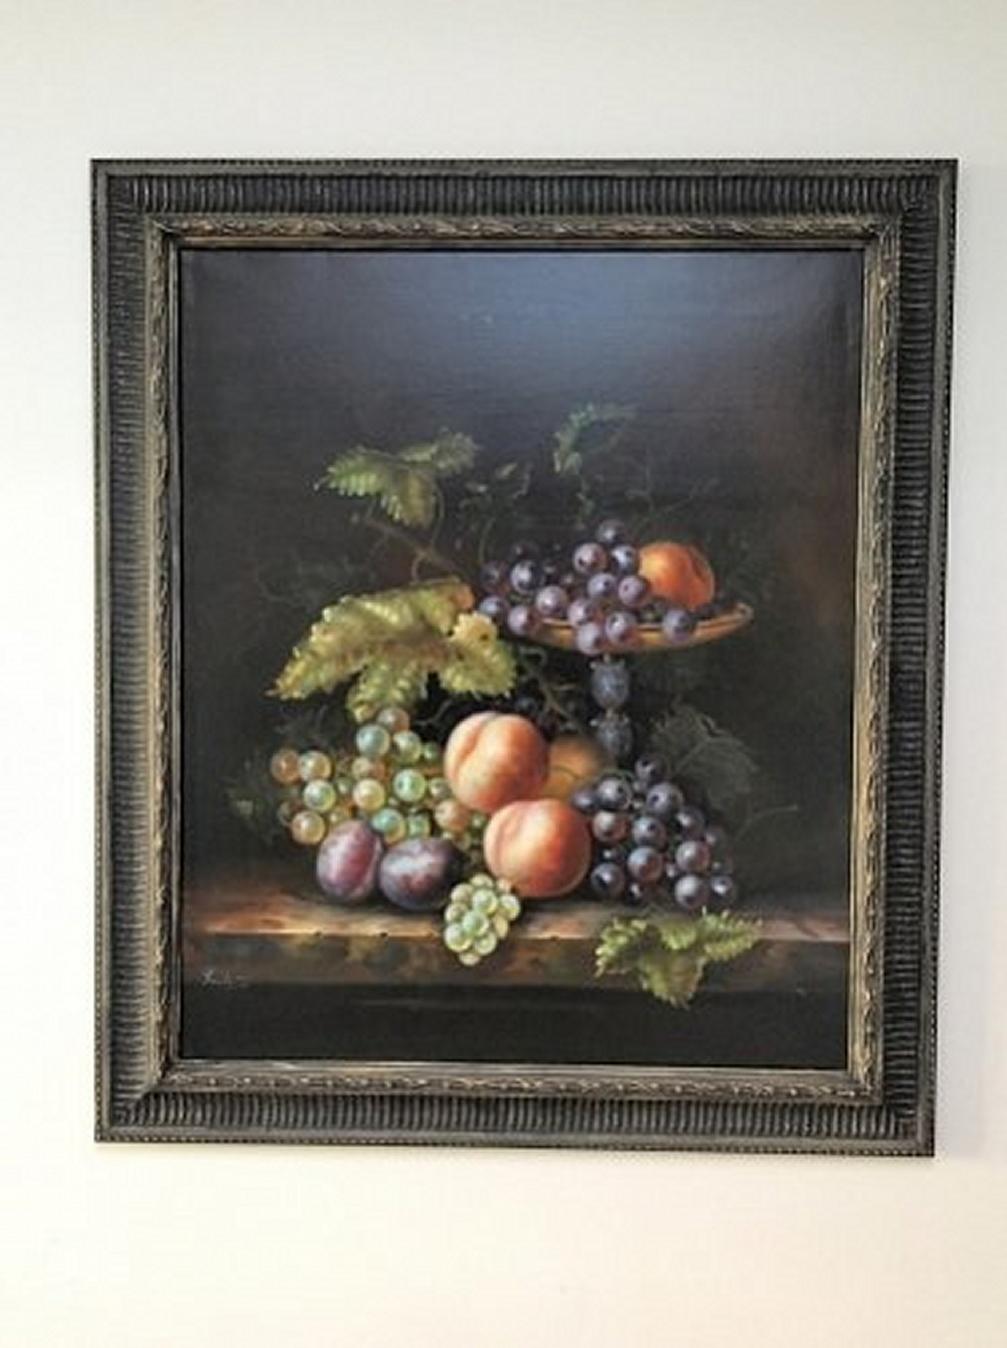 A Highly Decorative Pair of Still Life's, Oil On Canvas's, Both framed same, one indistinctly signed other presumed by same hand. Both are very attractive as a pair. mid 20thc

Landscape one Width 73 cm, Height 63 cm and Depth 4 cm

Portrait one